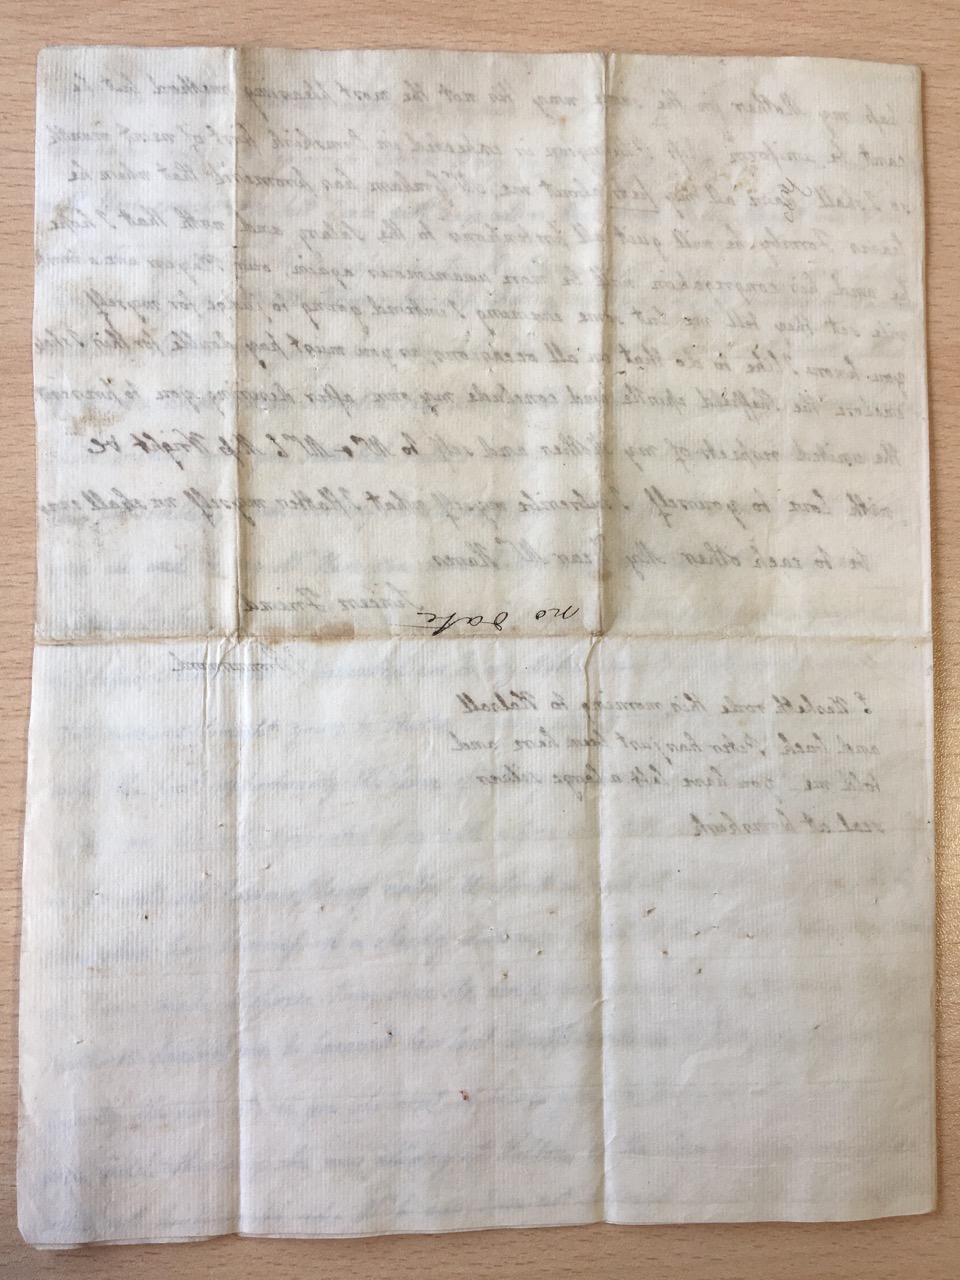 Image #4 of letter: J[enny] Brownsword to Ann Hare, Friday [c1783?]